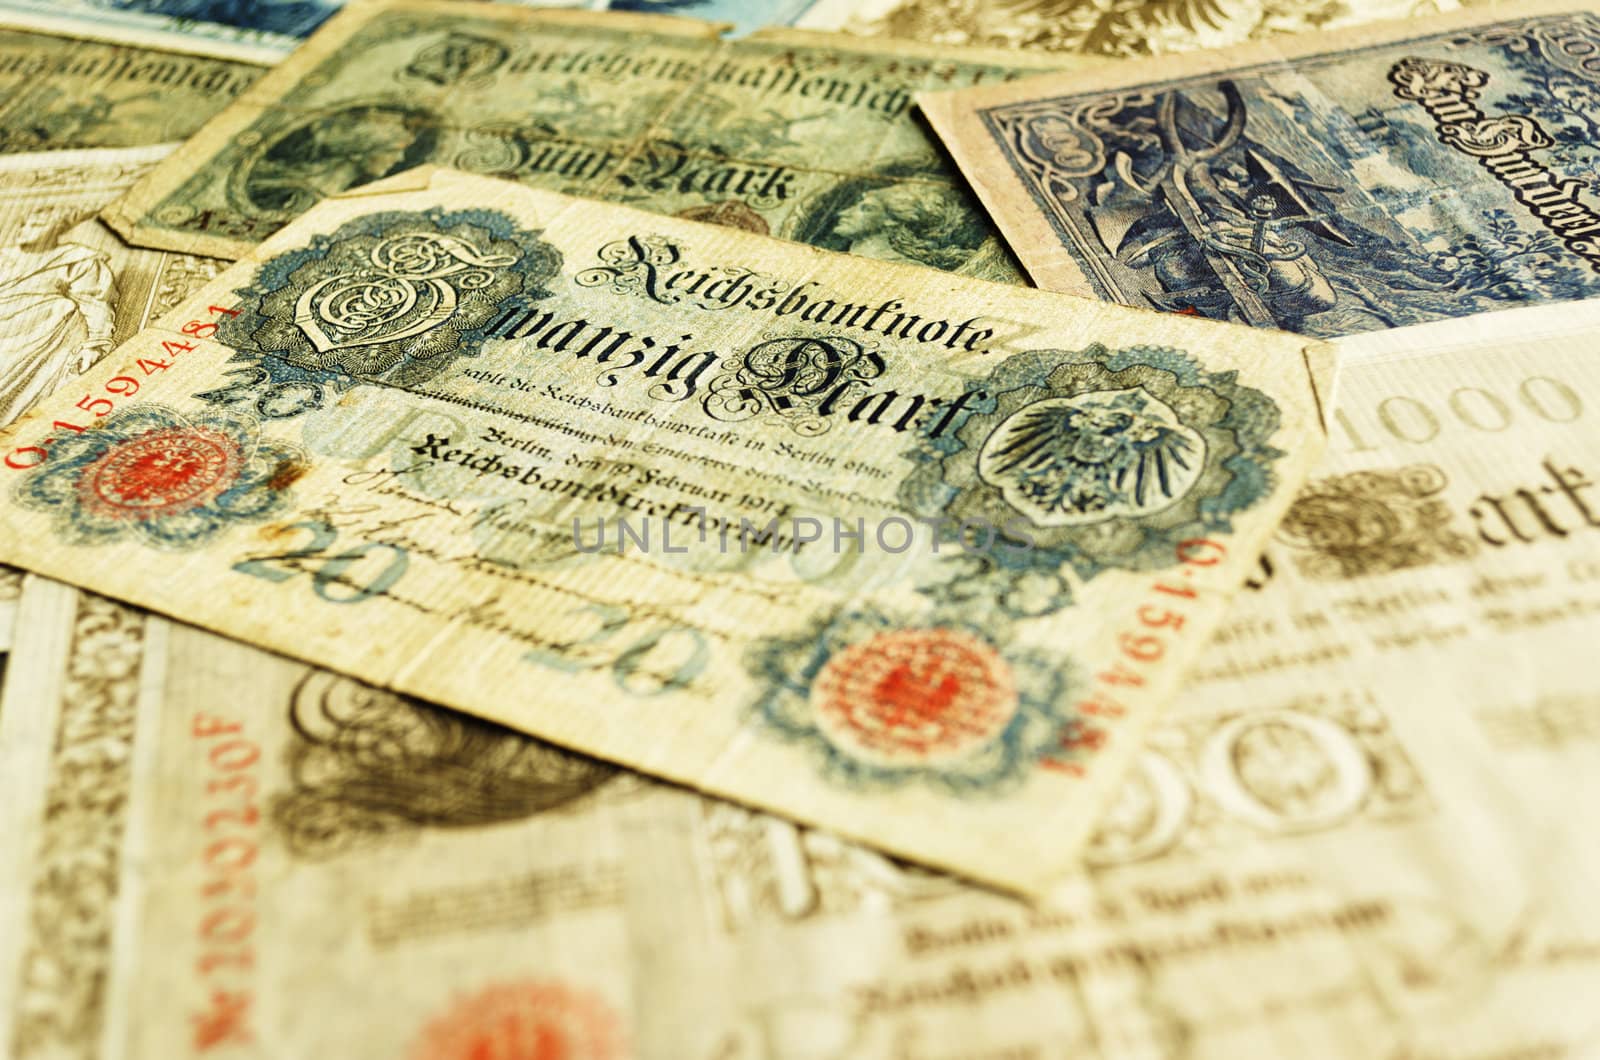 Old German banknote from 1914 lying on top of other old banknotes.